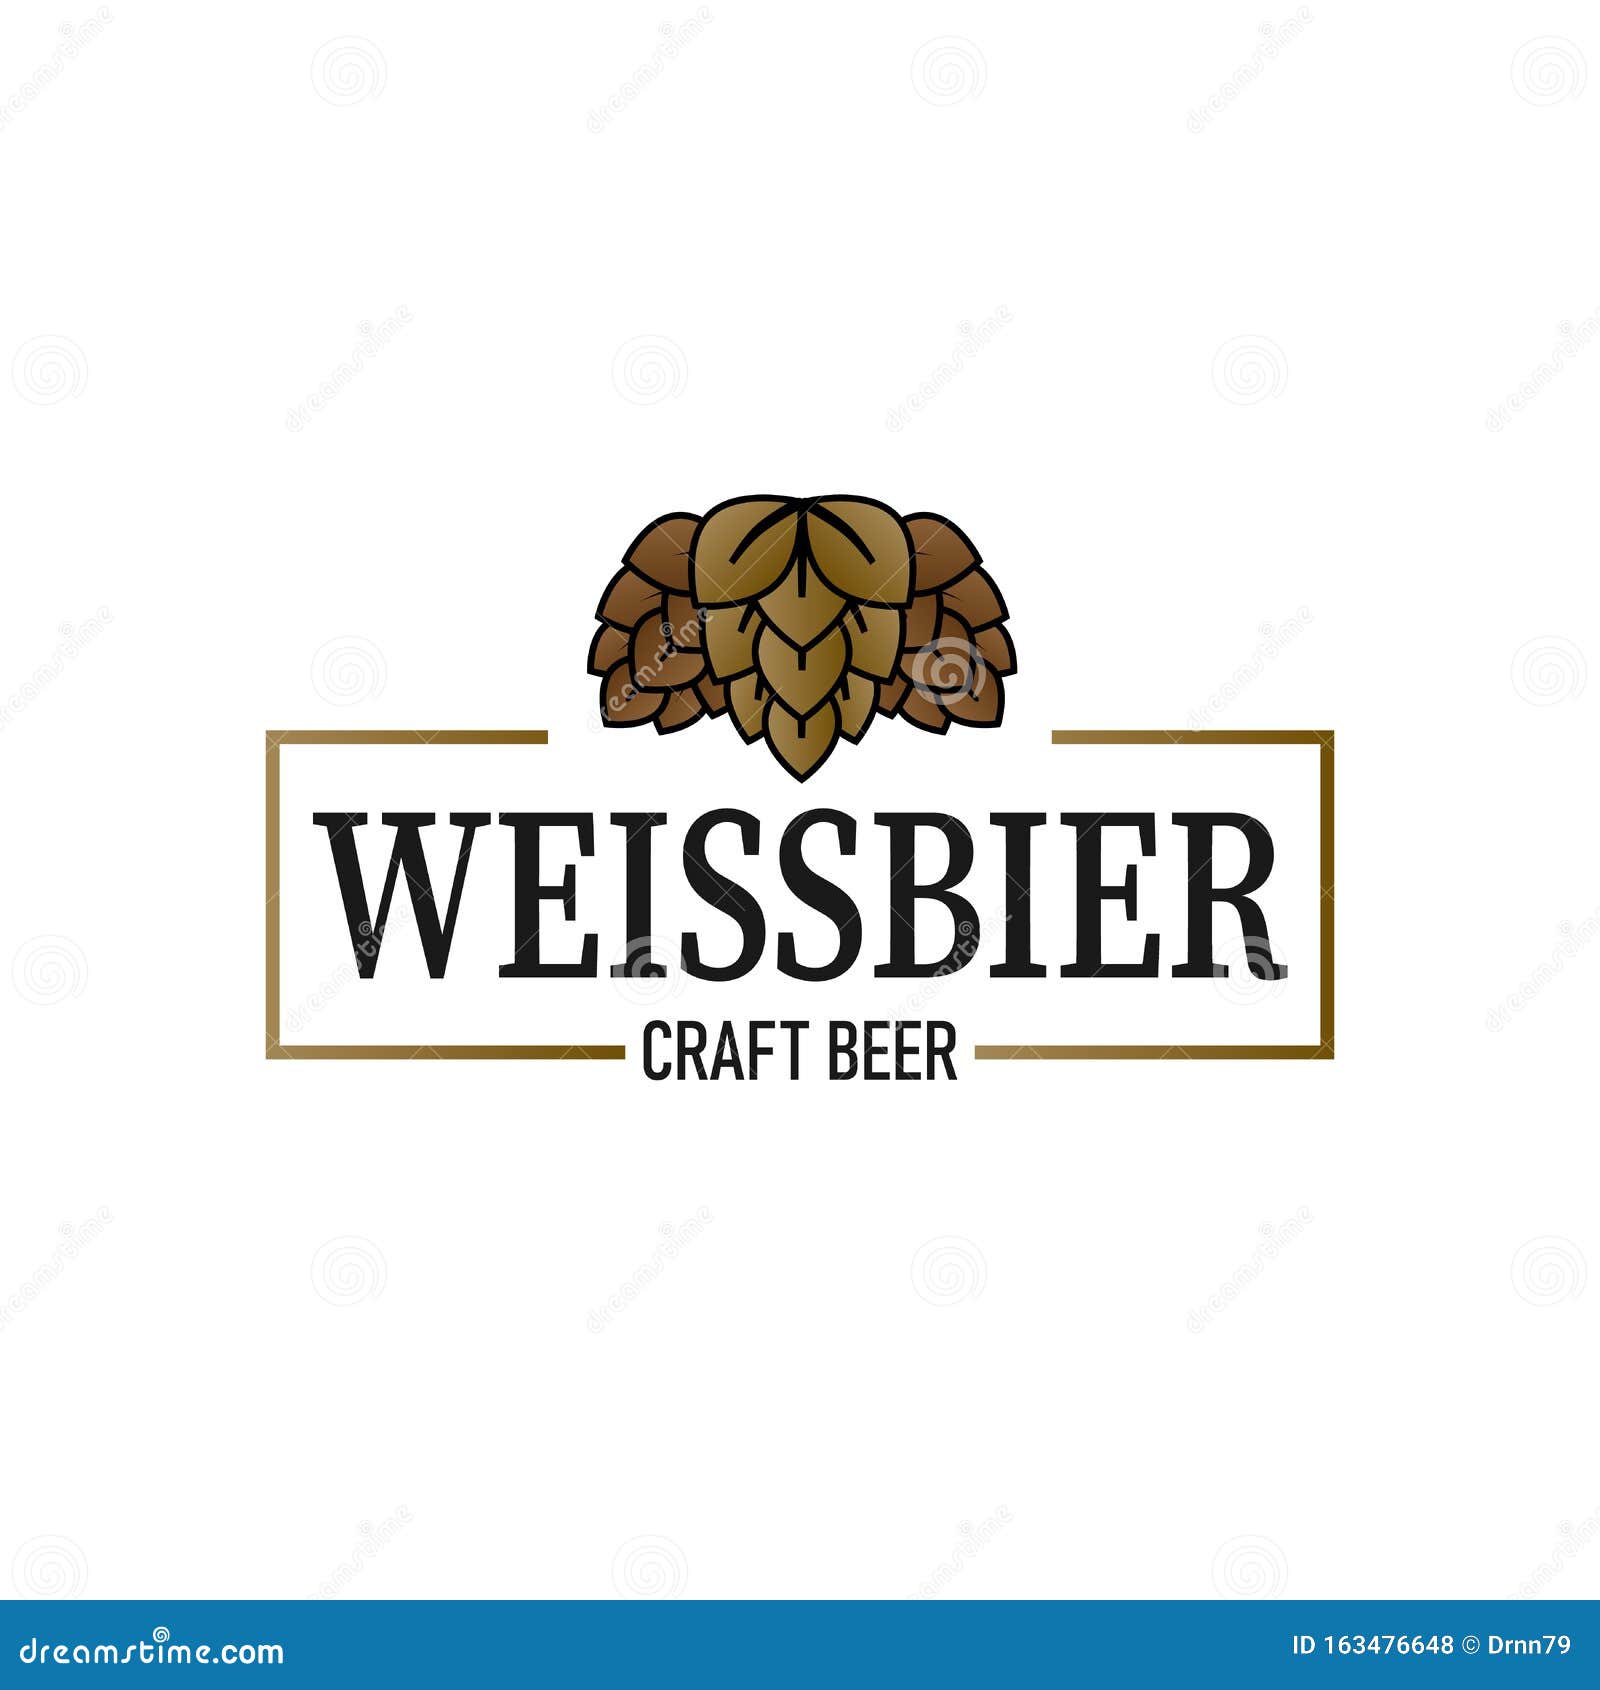 weissbier beer   craft beer logo graphic. great for menu, label, sign, invitation or poster.